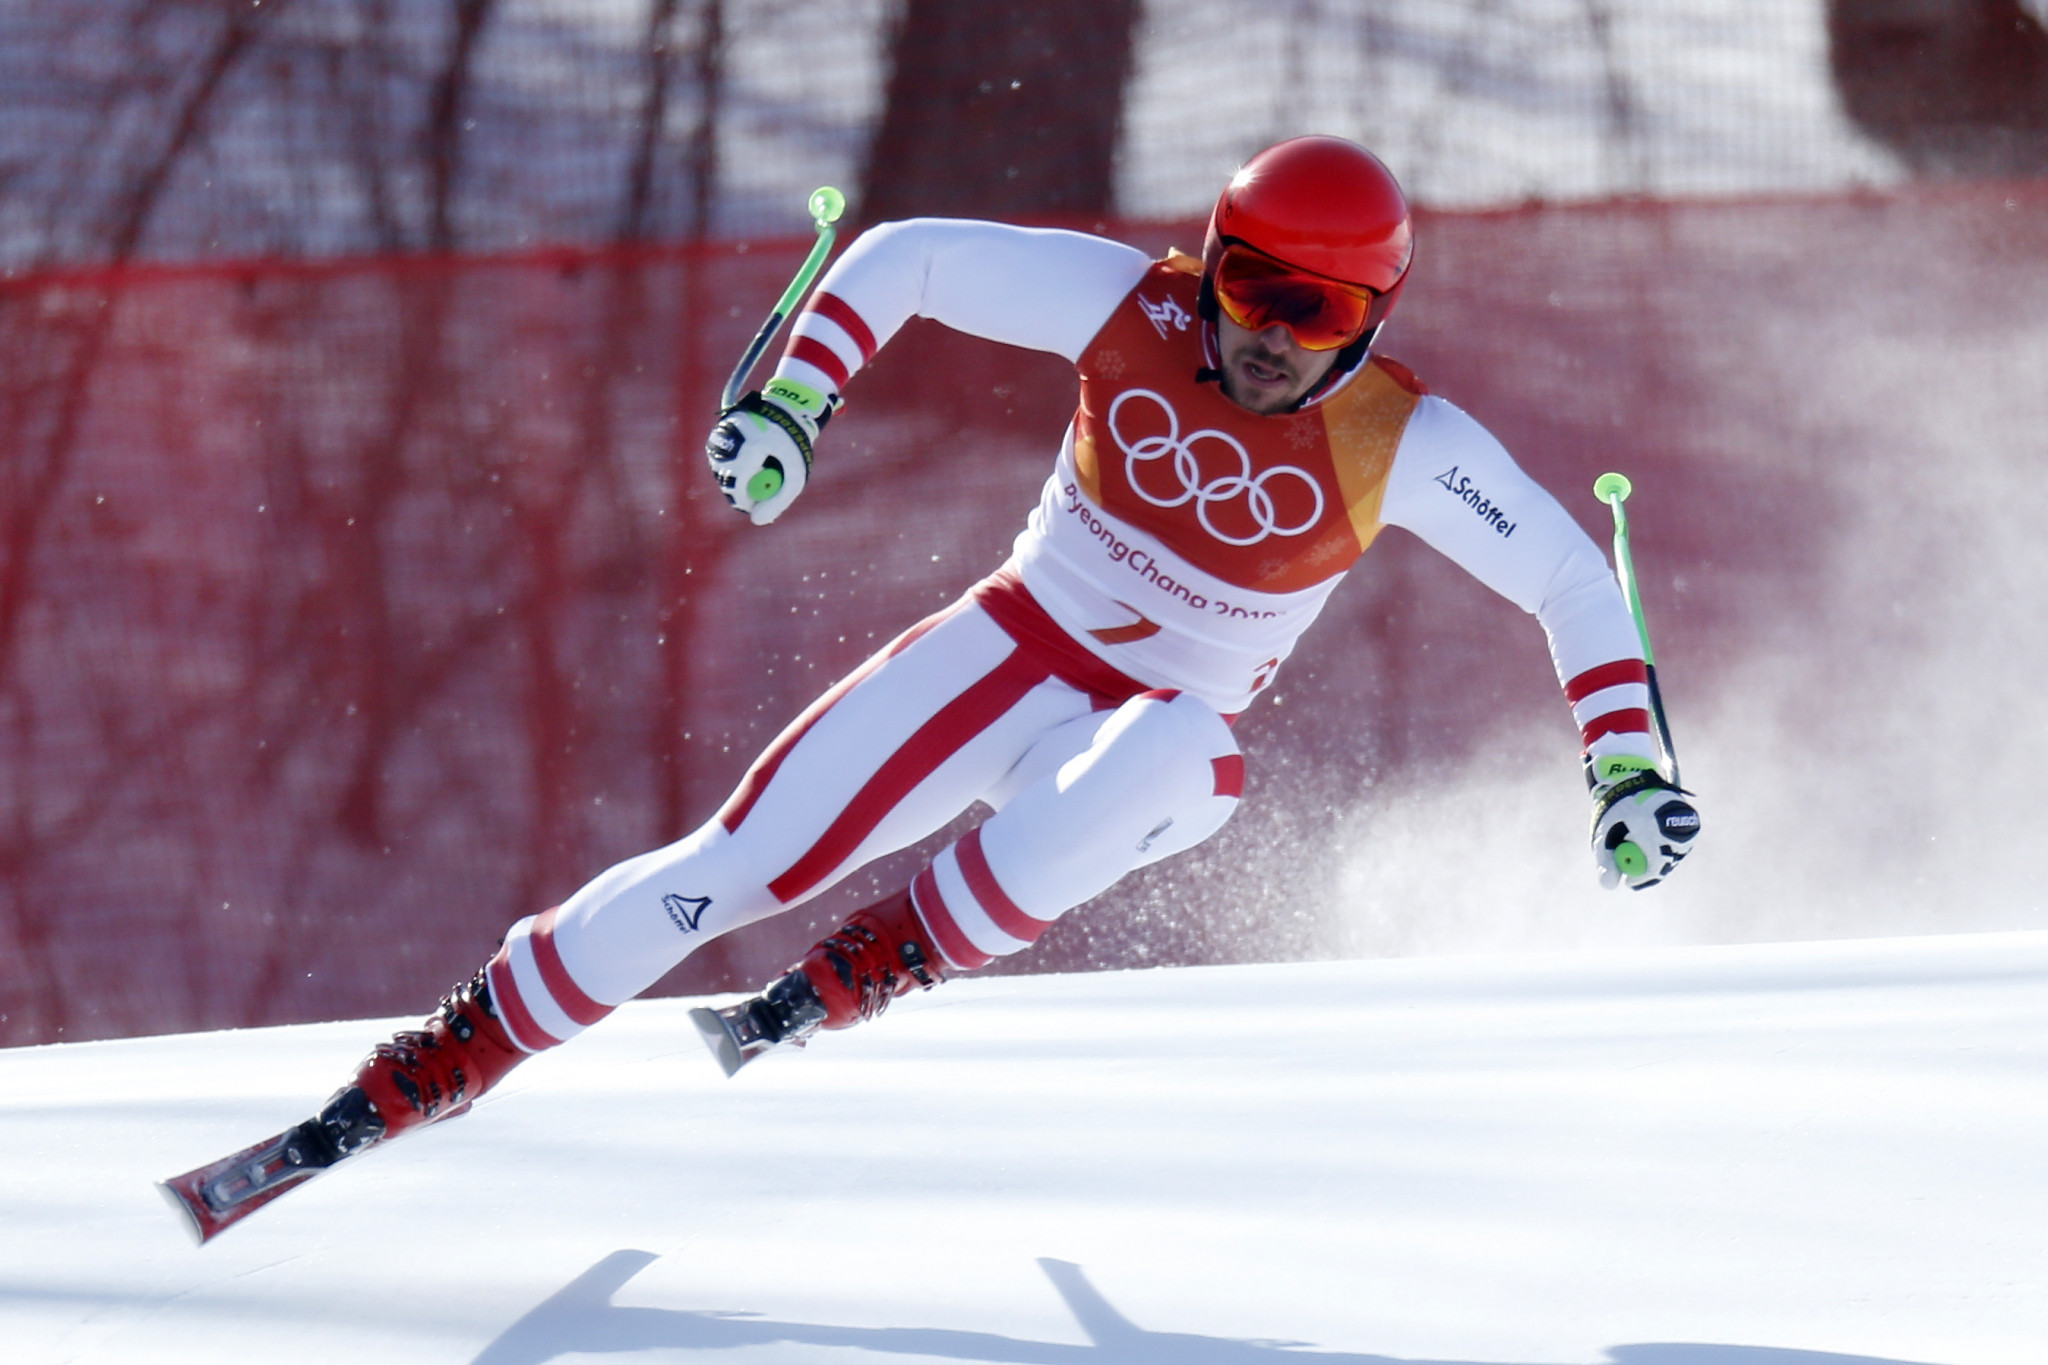 Marcel Hirscher of Austria won the Alpine combined event today ©Getty Images